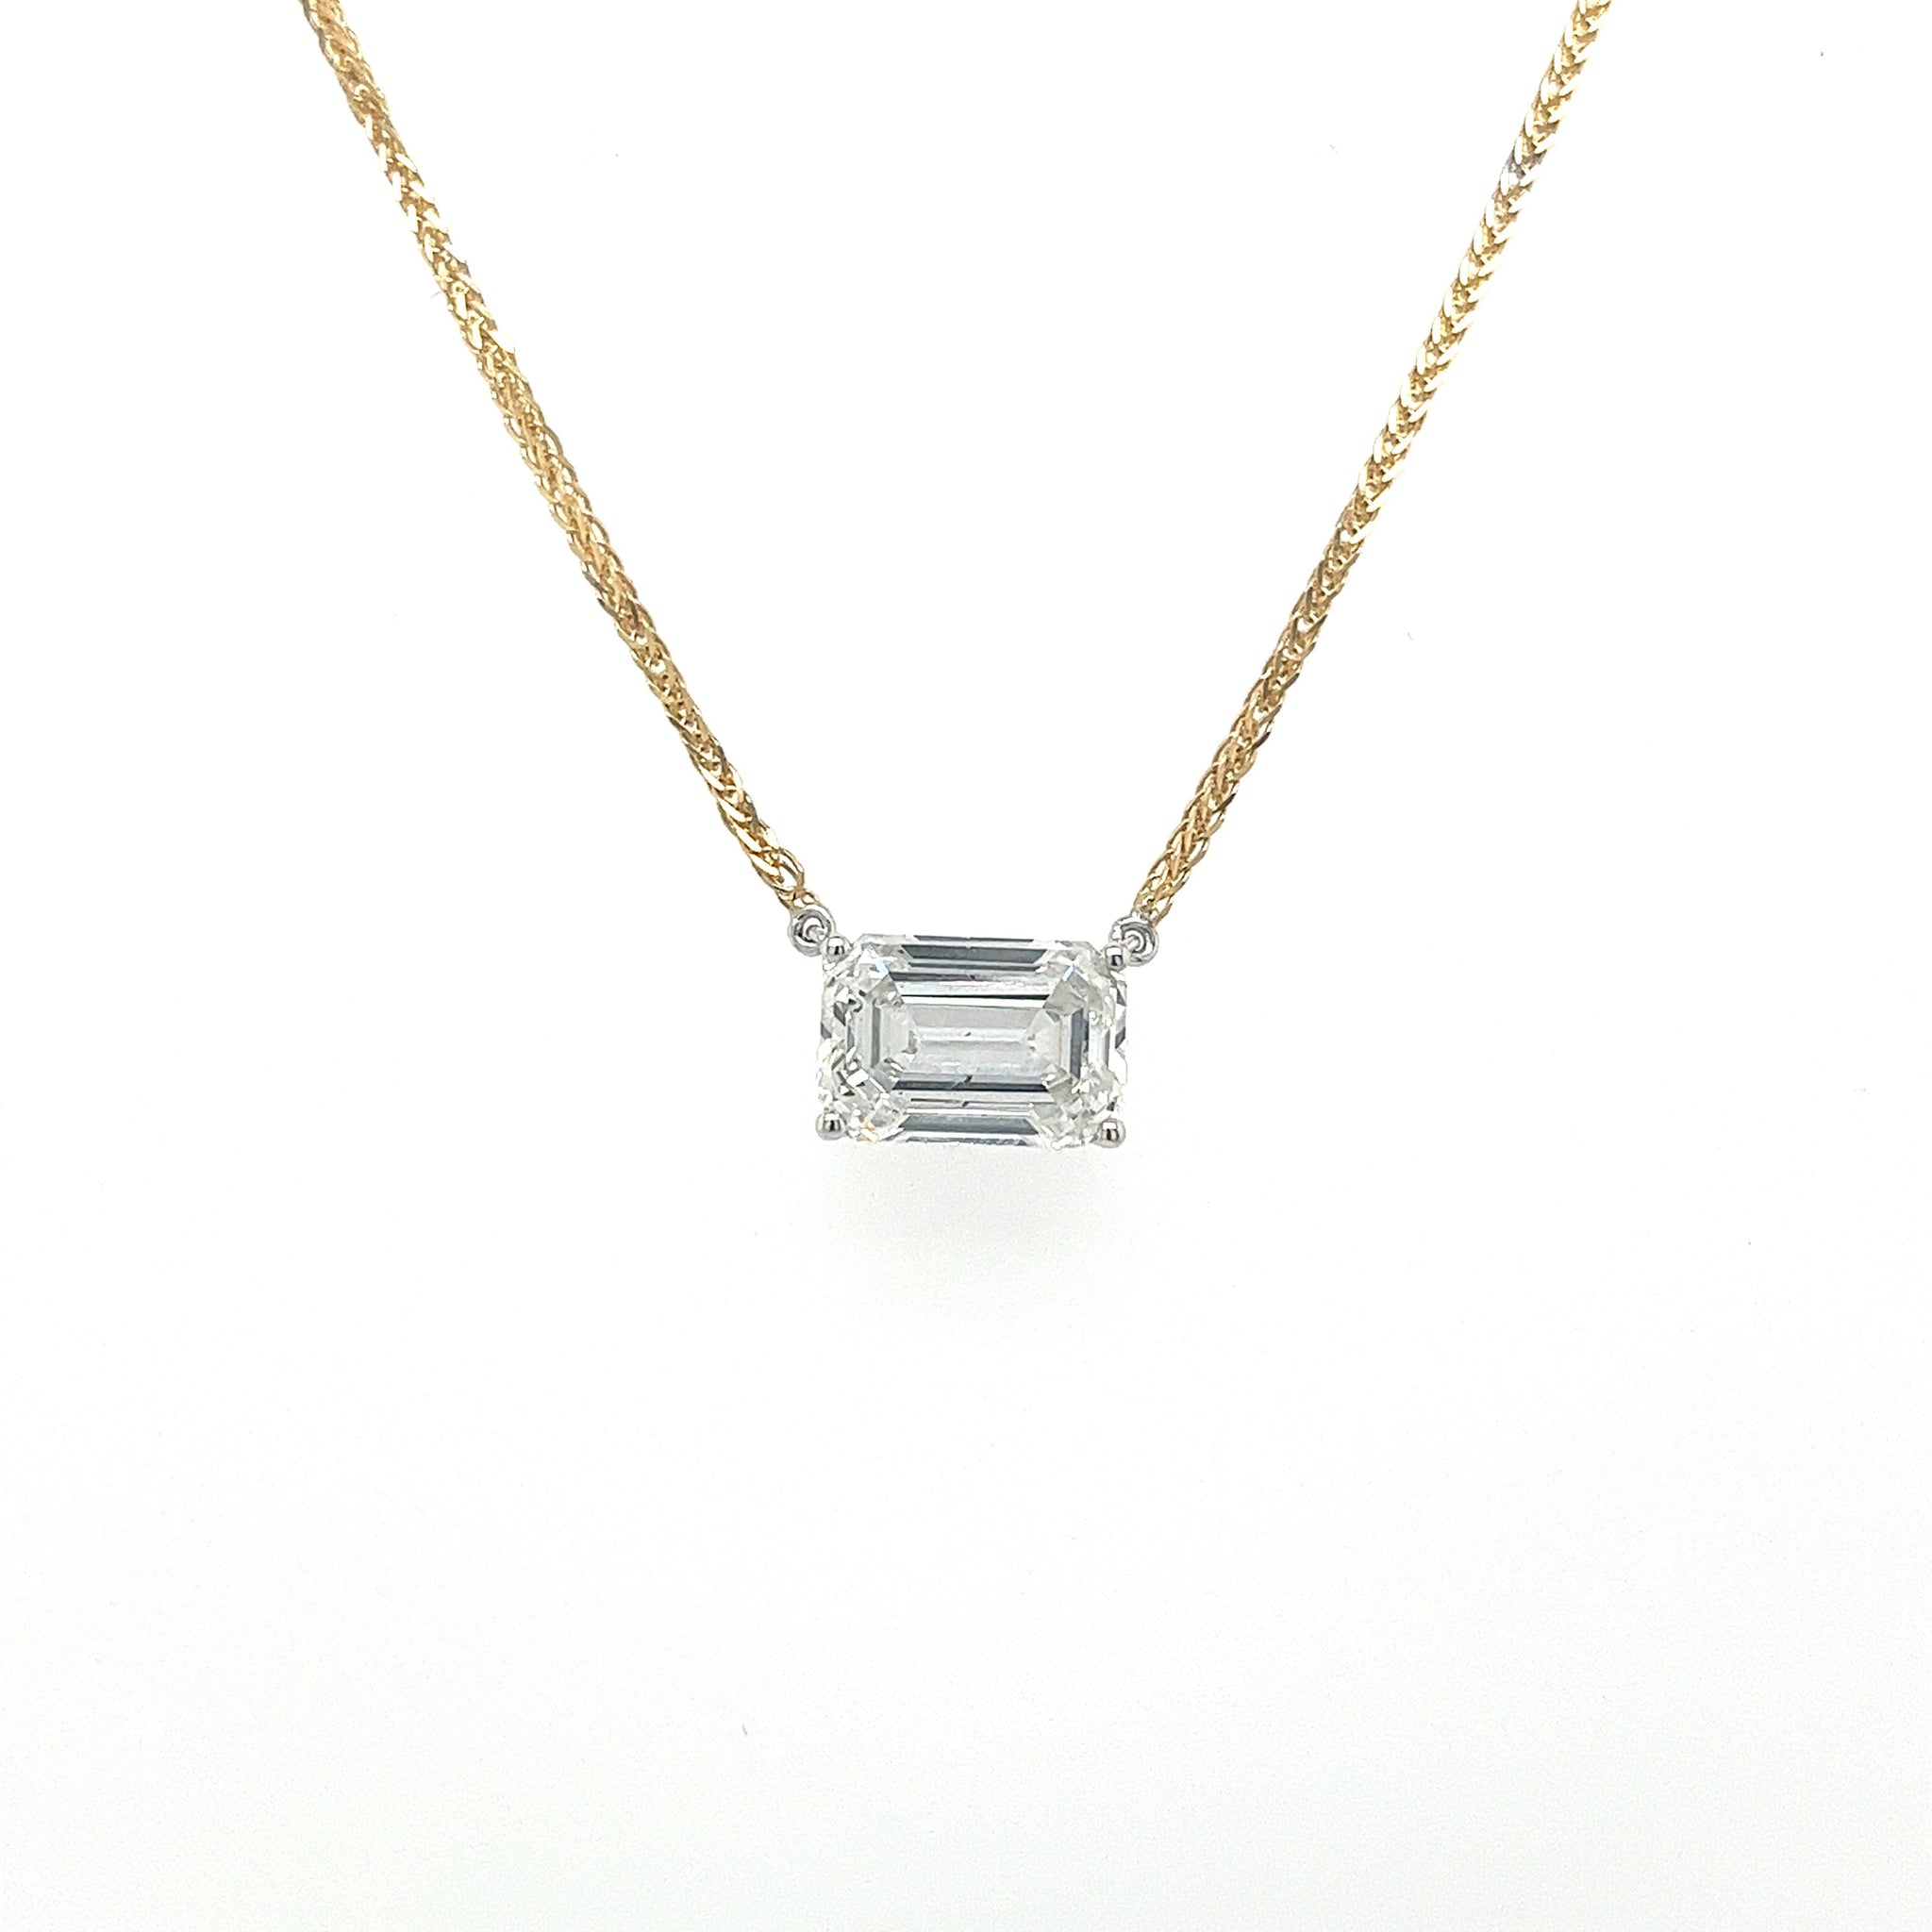 Floating Solitaire Pendant in 18K White Gold